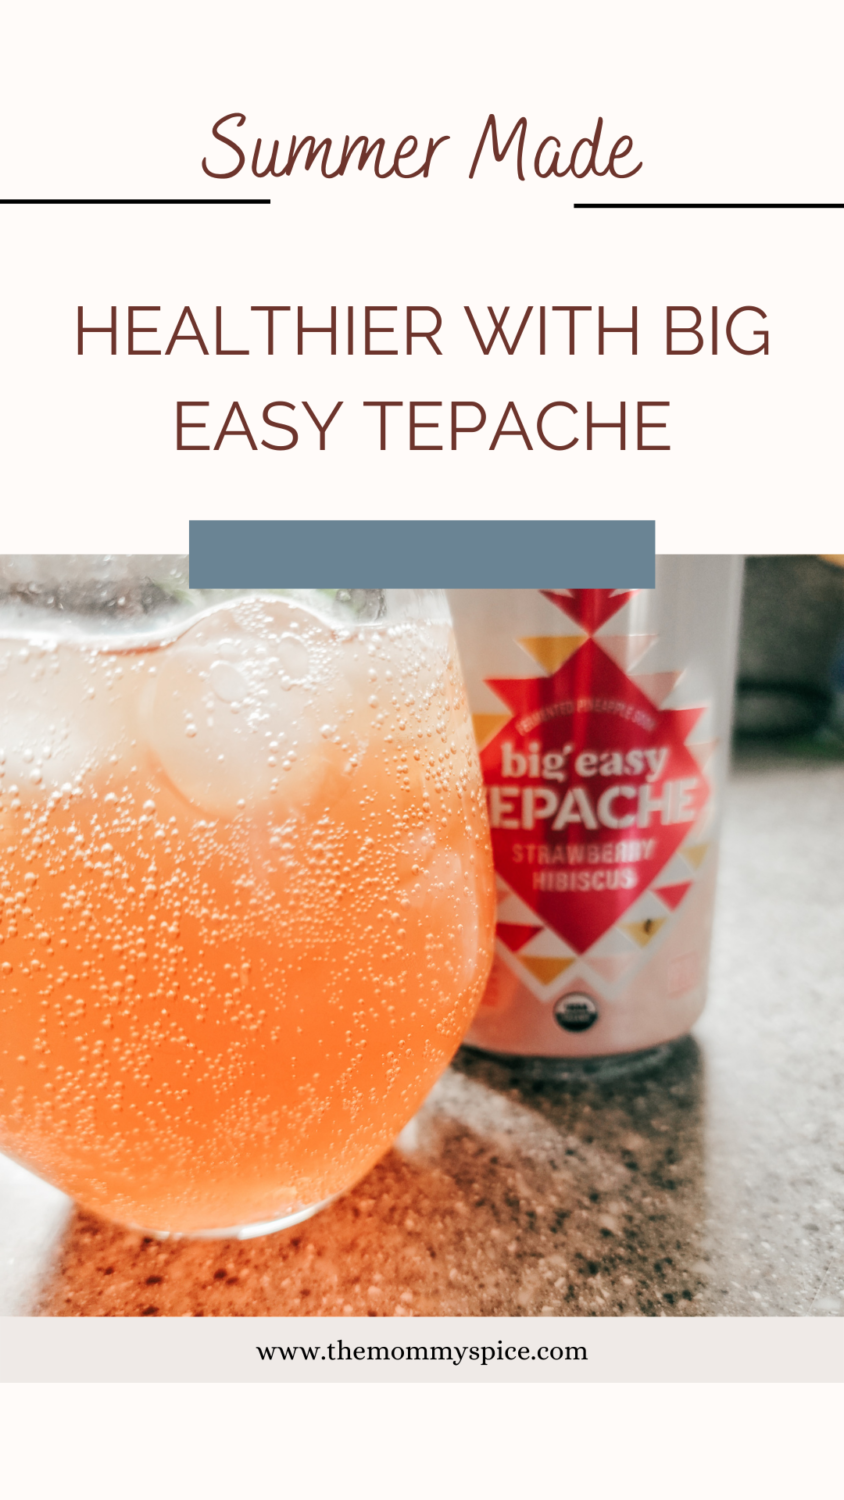 Picture of big easy tepache in a glass